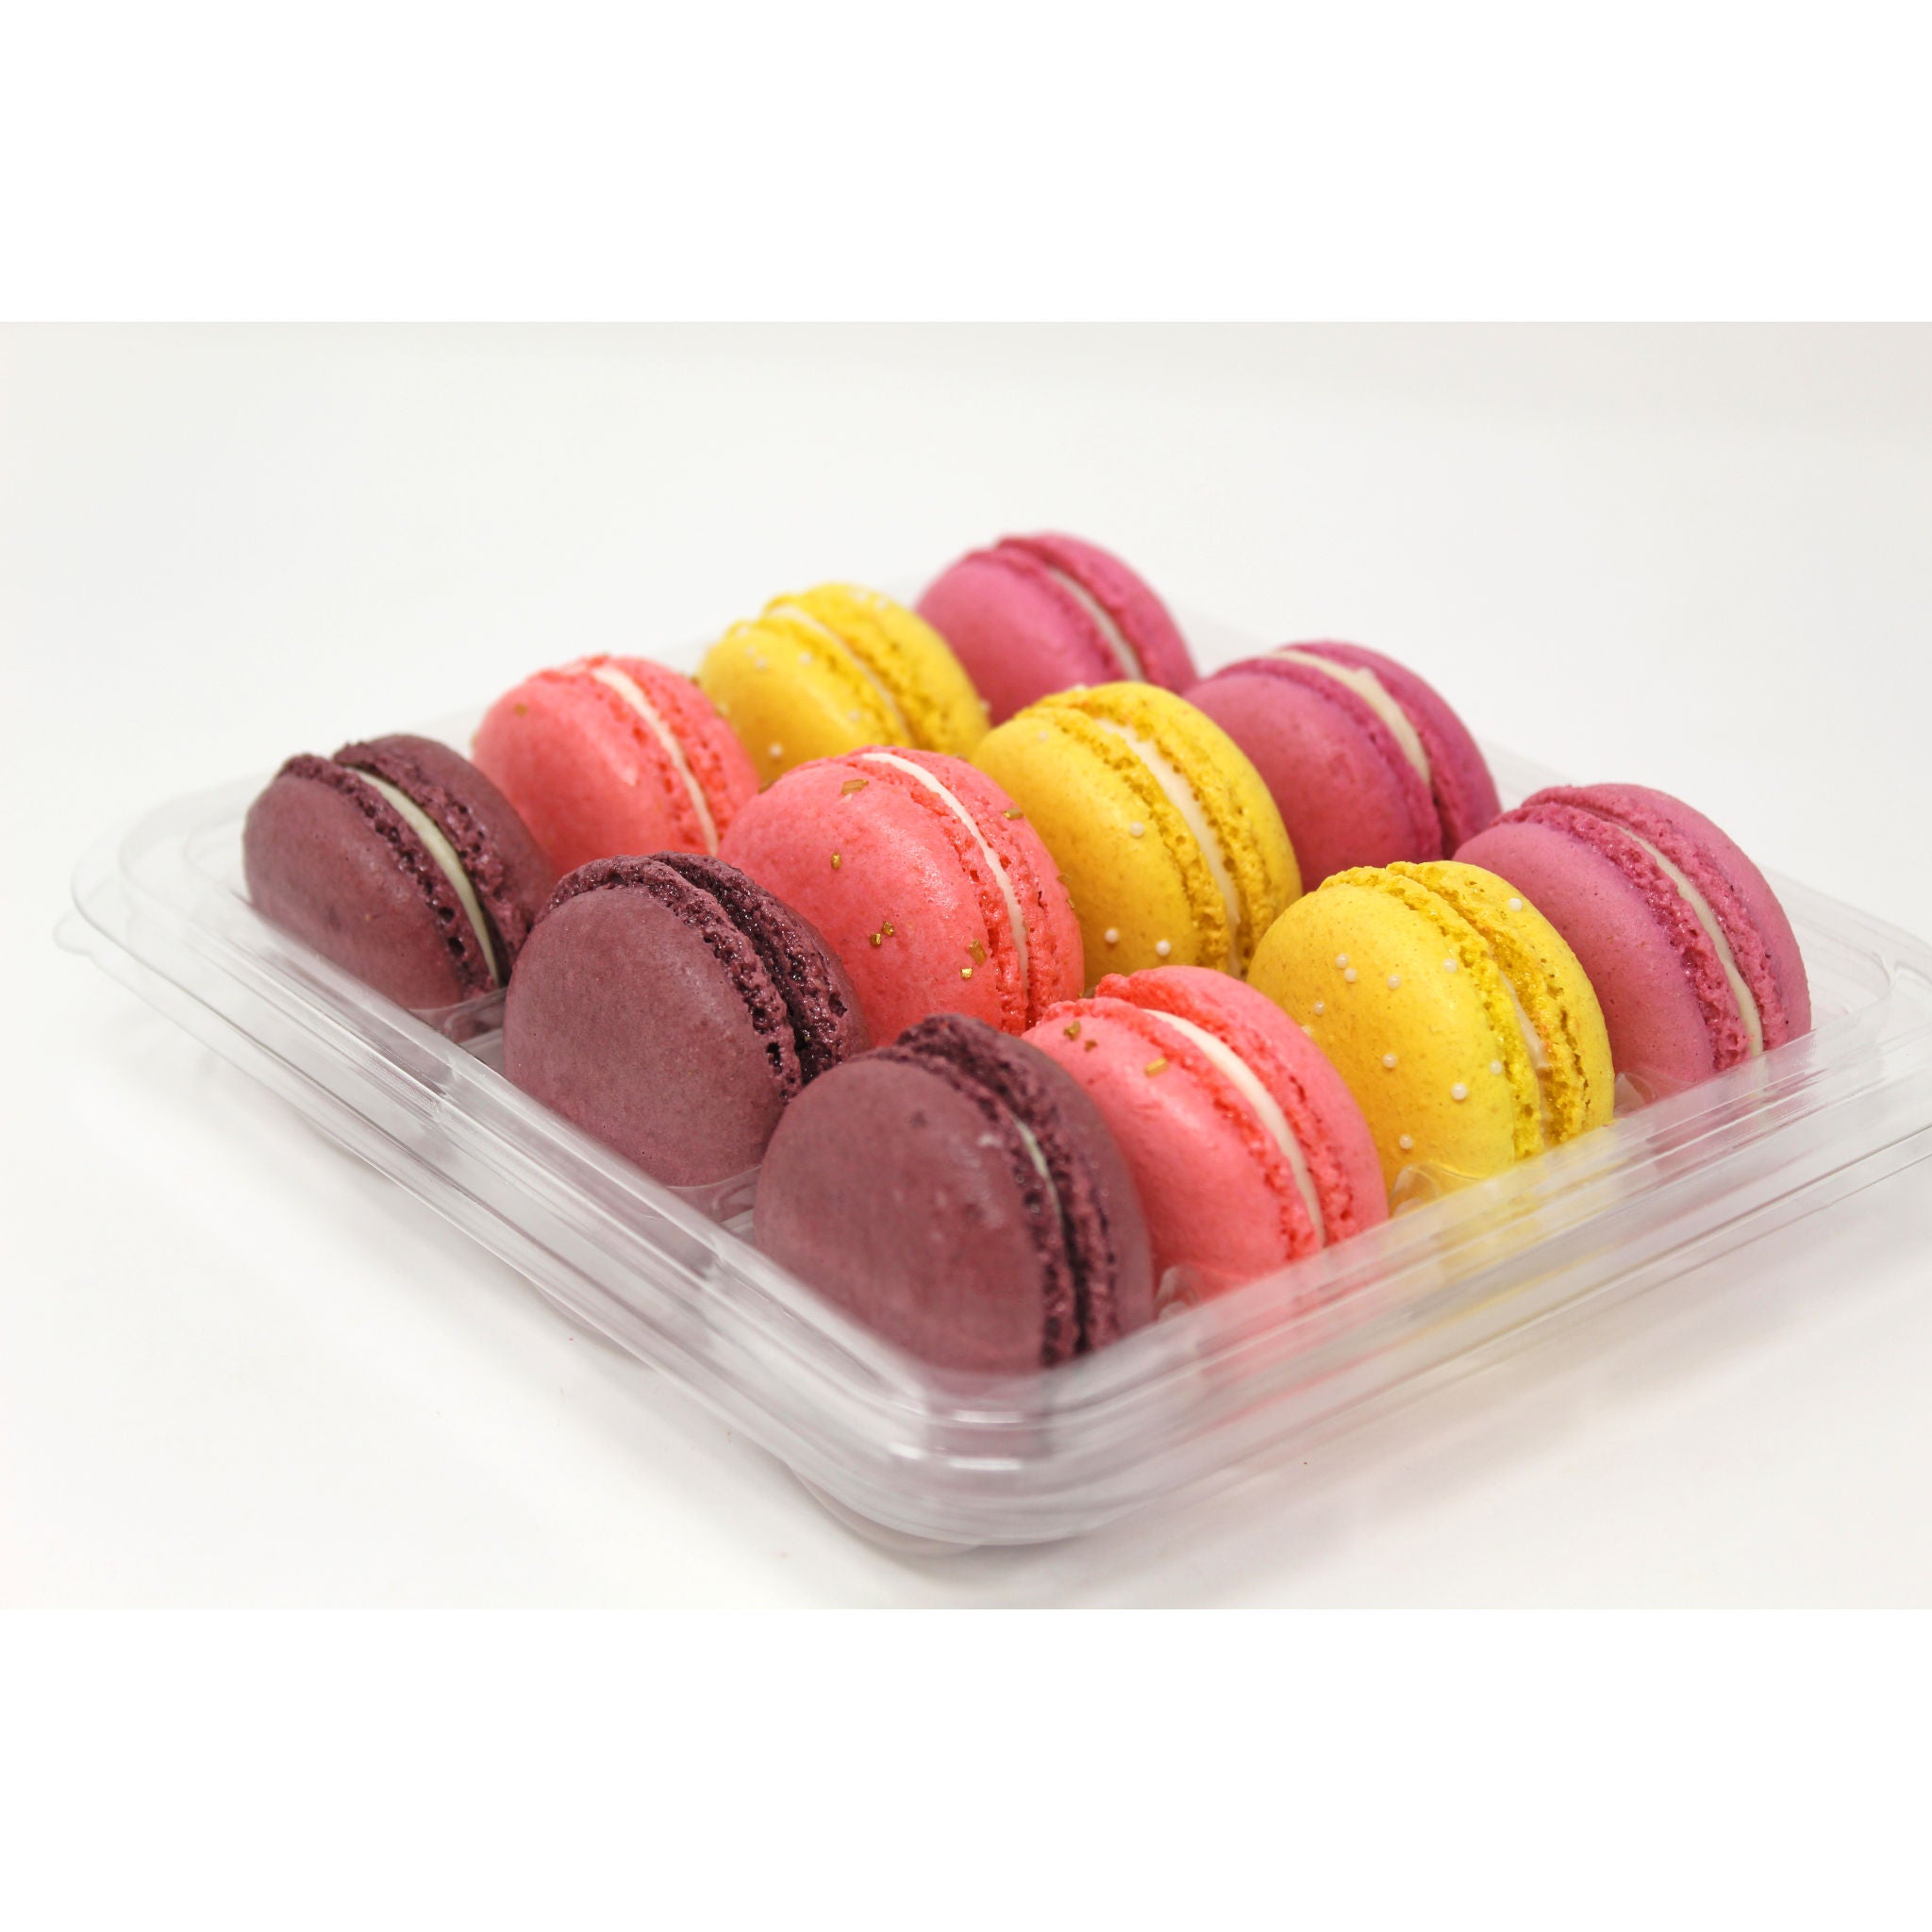 French Macarons - Culinary Labz